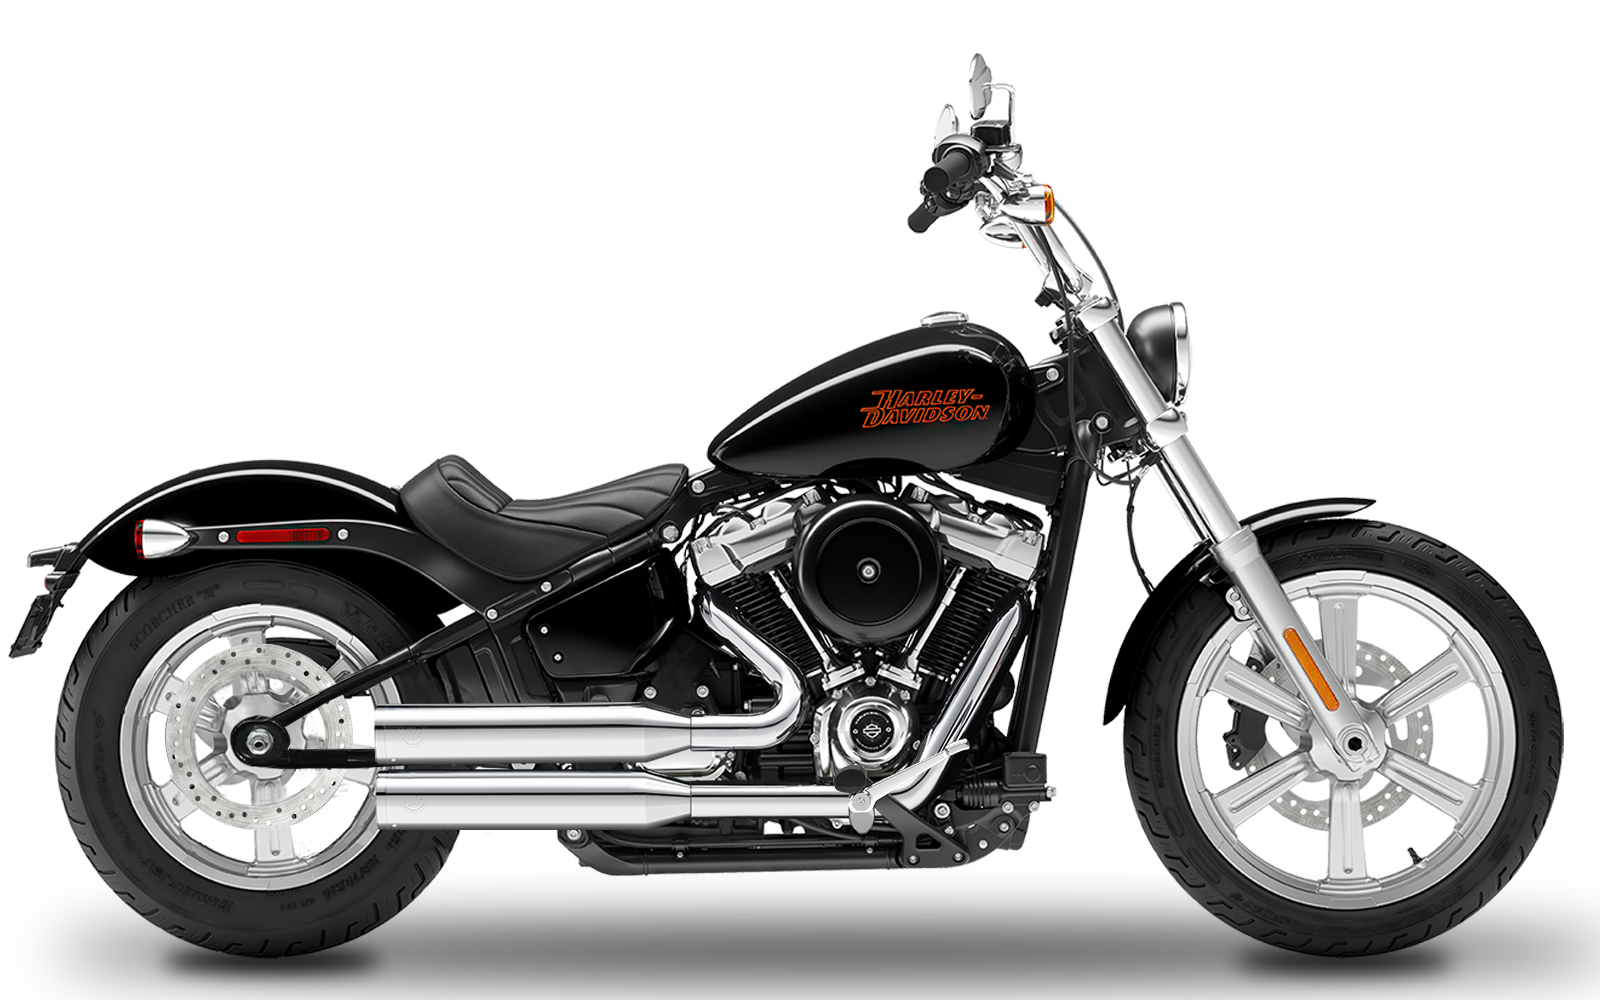 CRUISER/SOFTAIL - Standard - ME107 - 2021-2023 - Complete systems adjustable